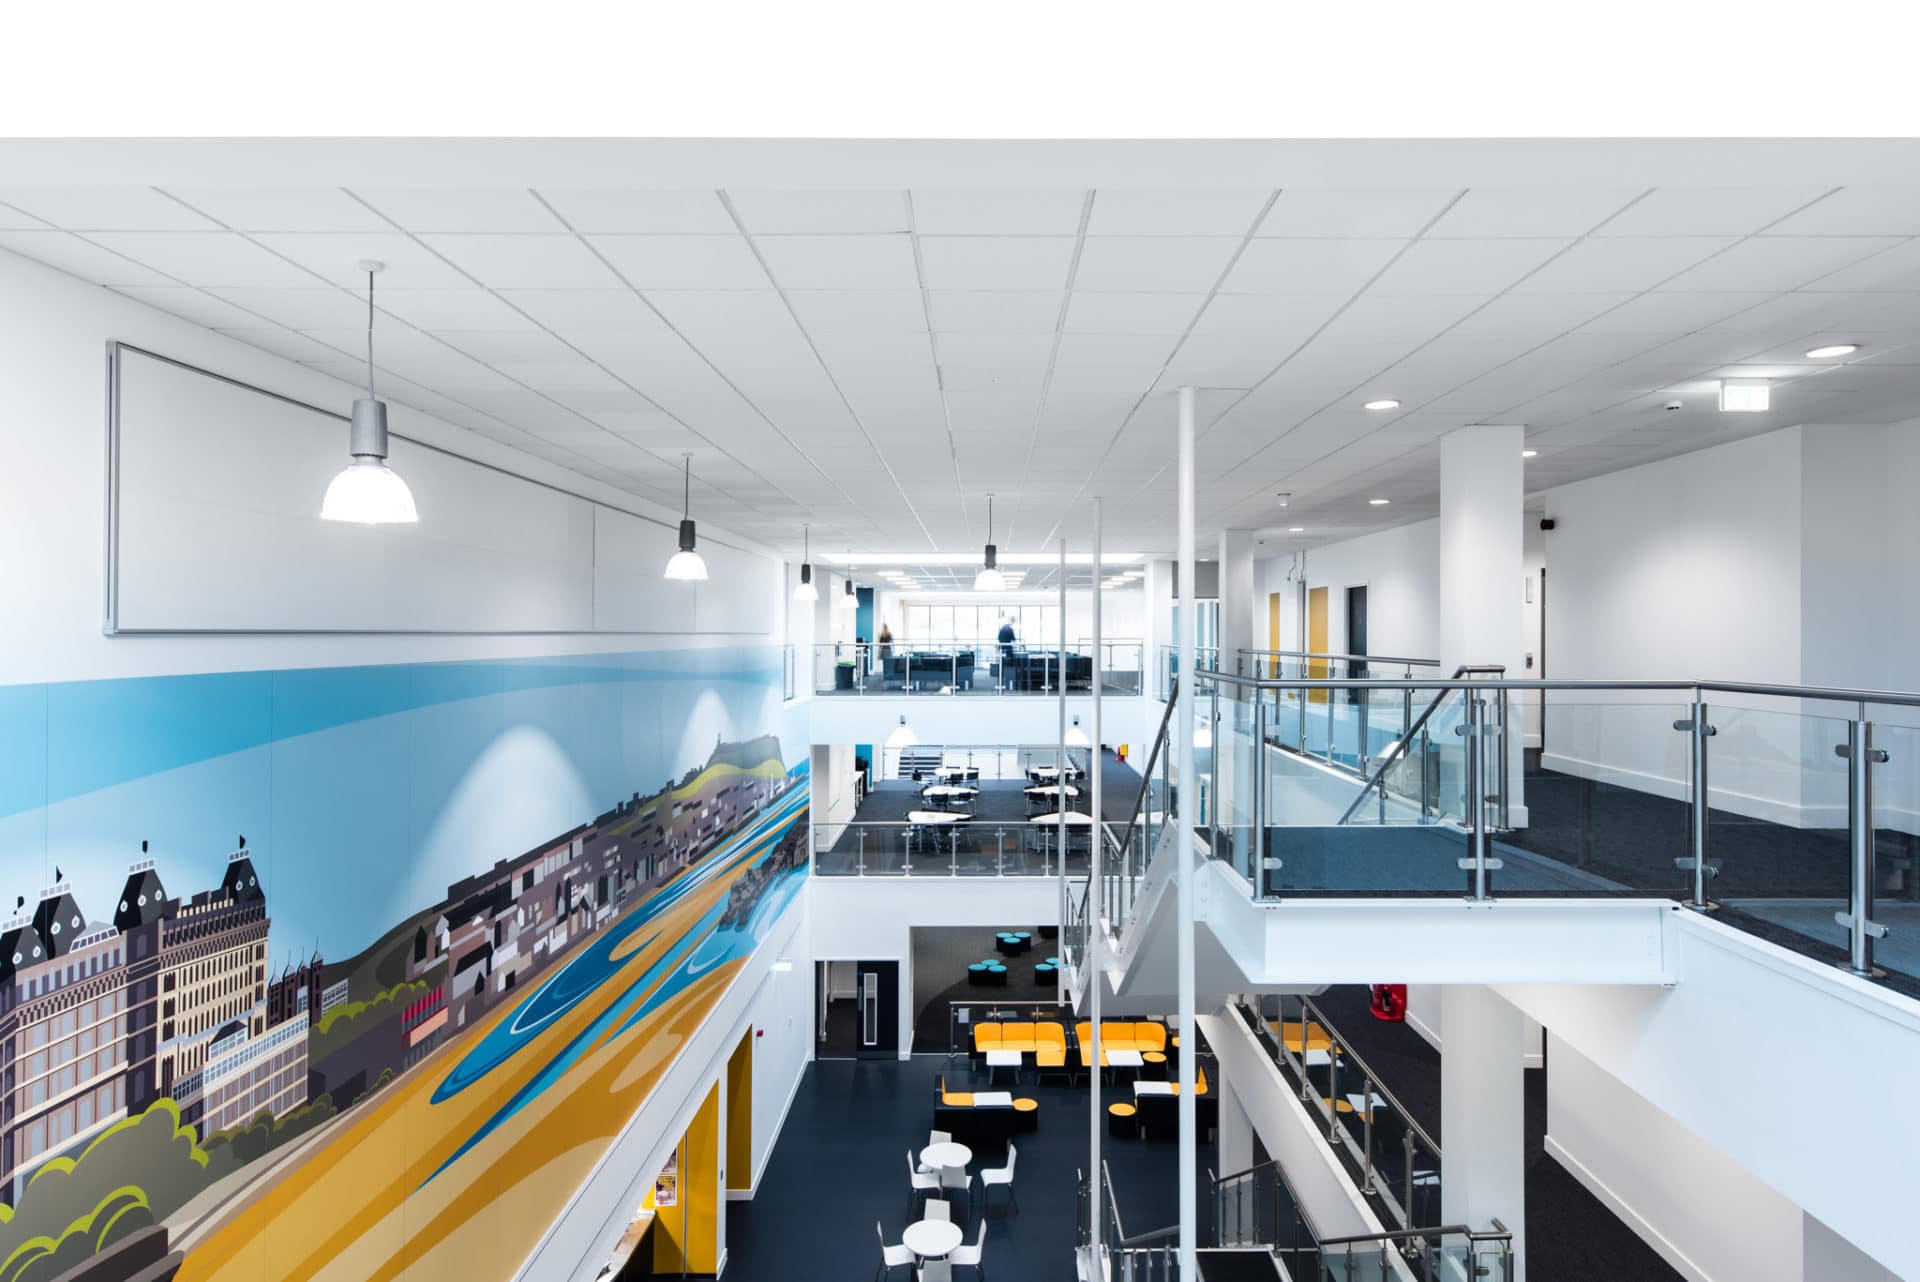 Rockfon’s ceiling solution for Scarborough education and leisure complex